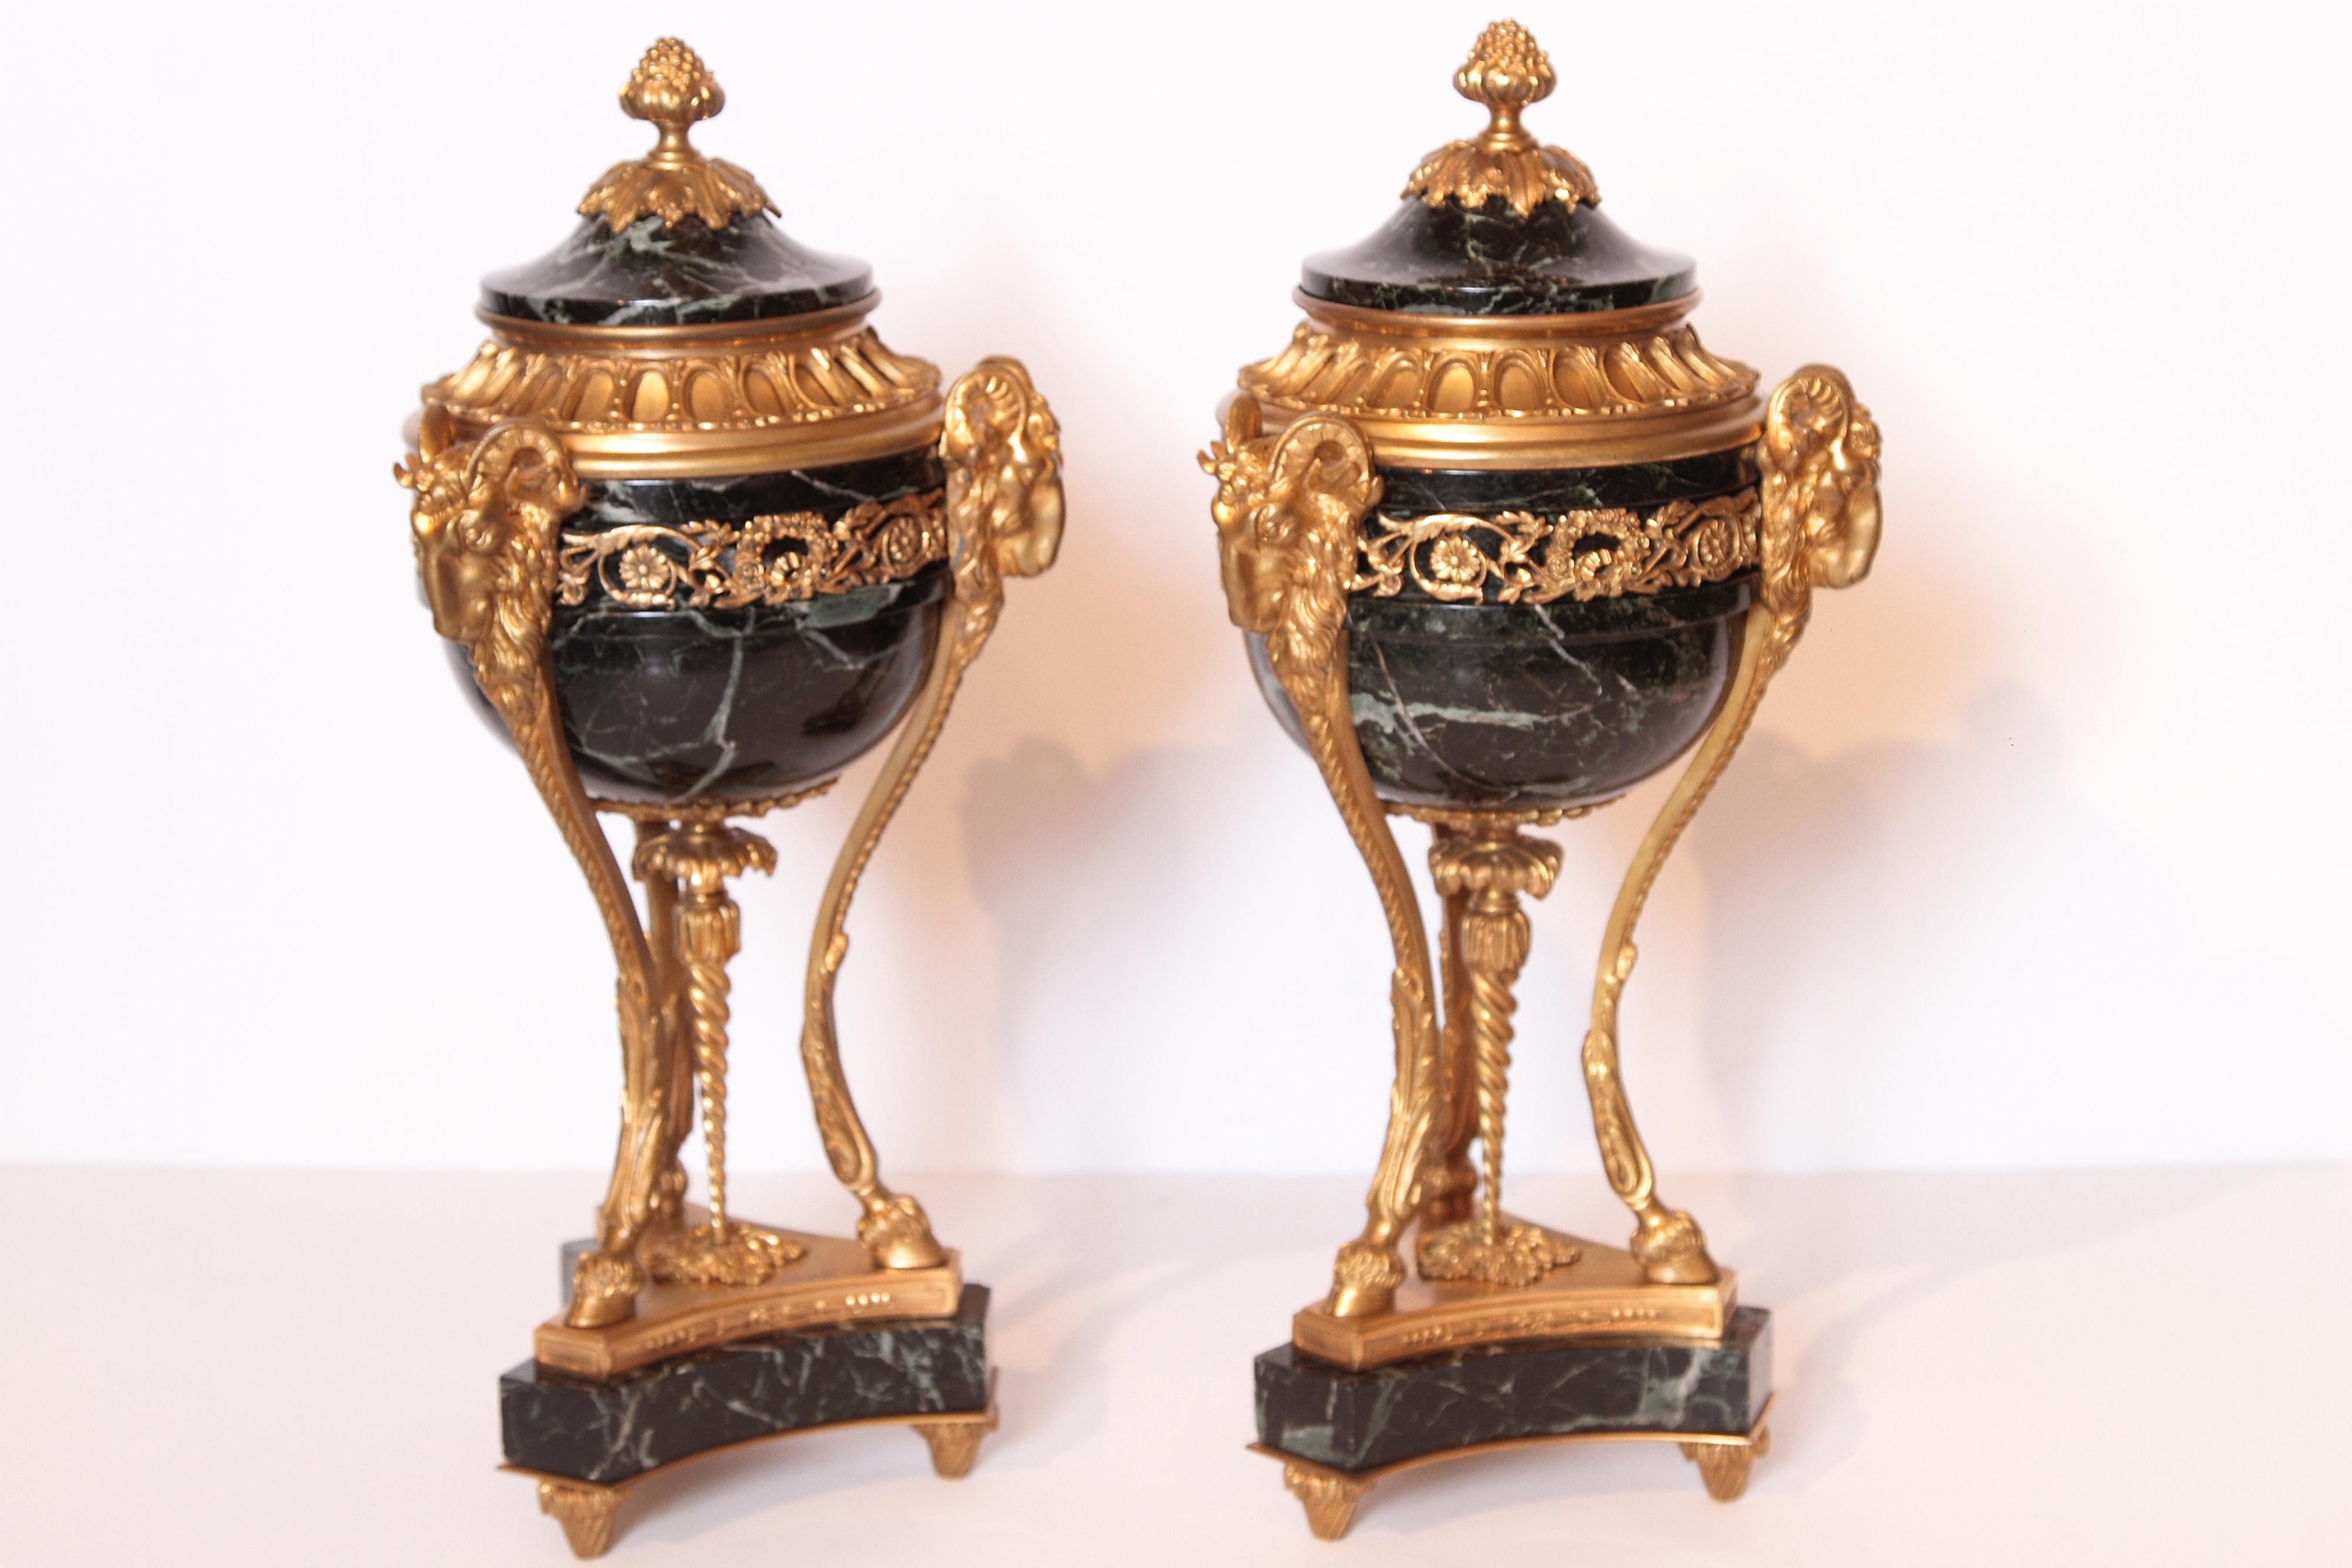 Pair of fine 19th century French Louis XVI tripod marble and gilt bronze urns with lids. Signed F. Barbedienne. Ram's head detail.